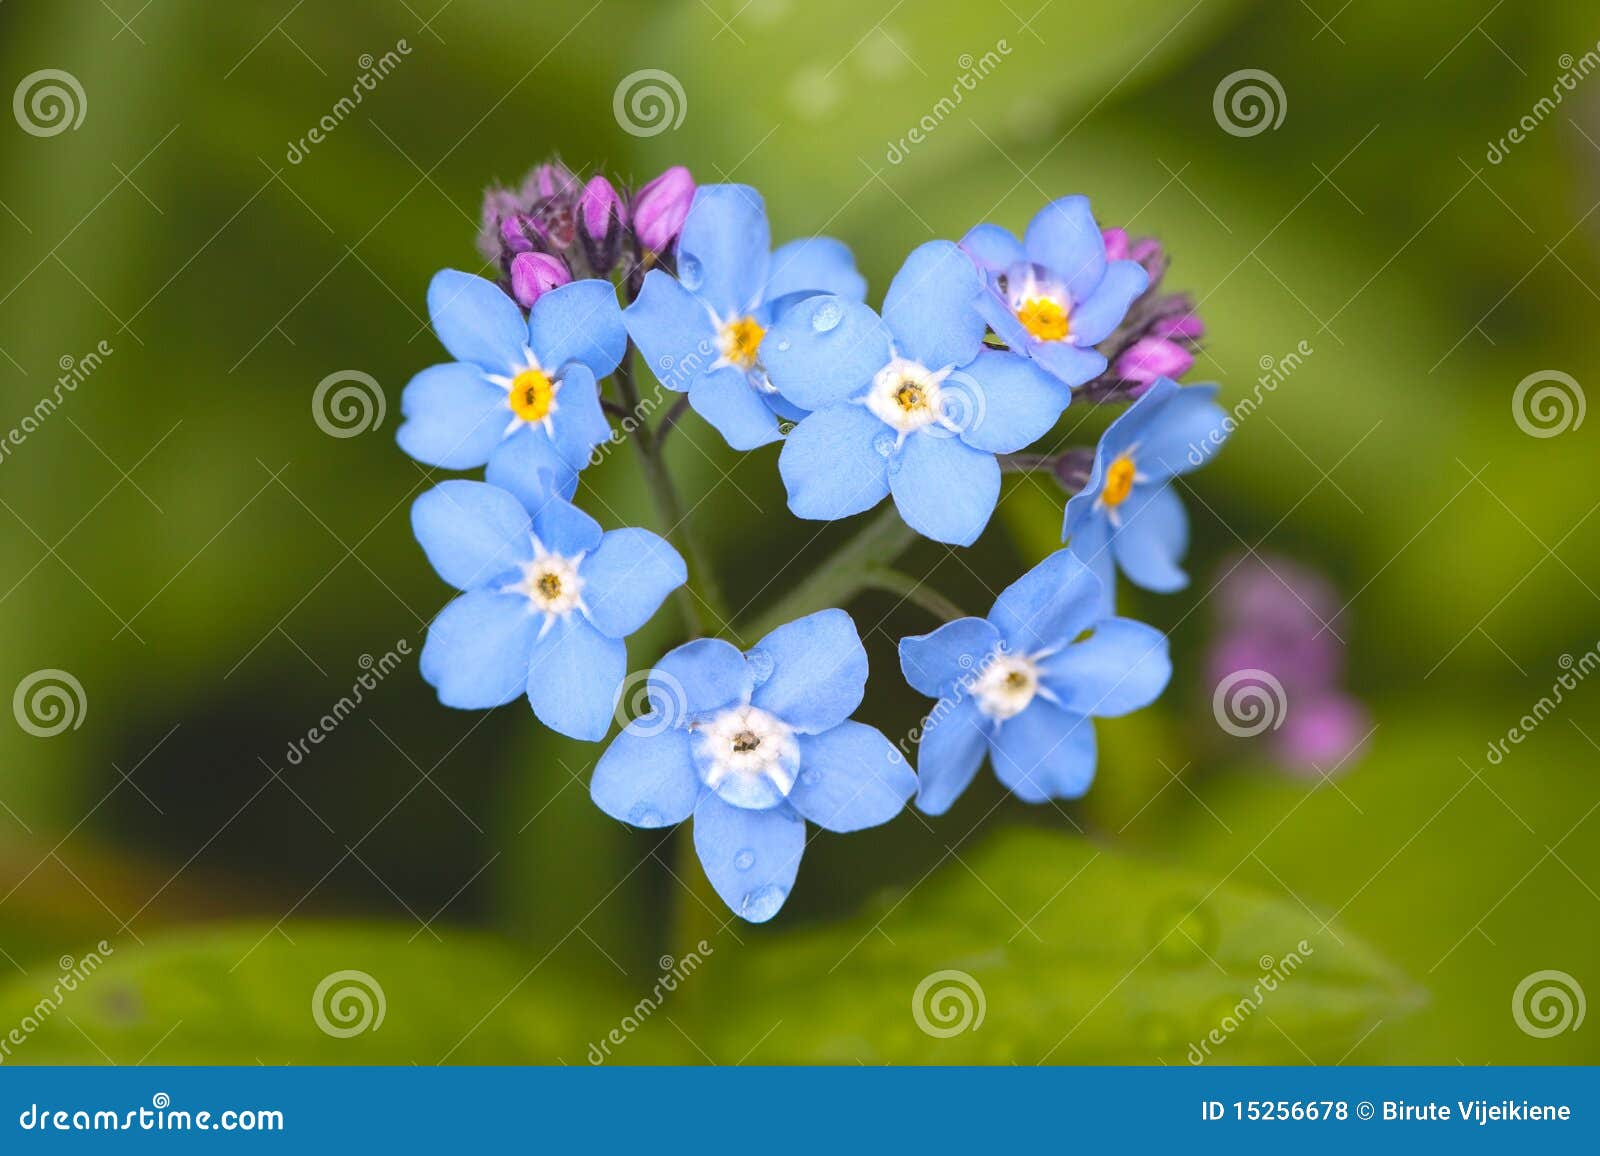 field forget-me-not